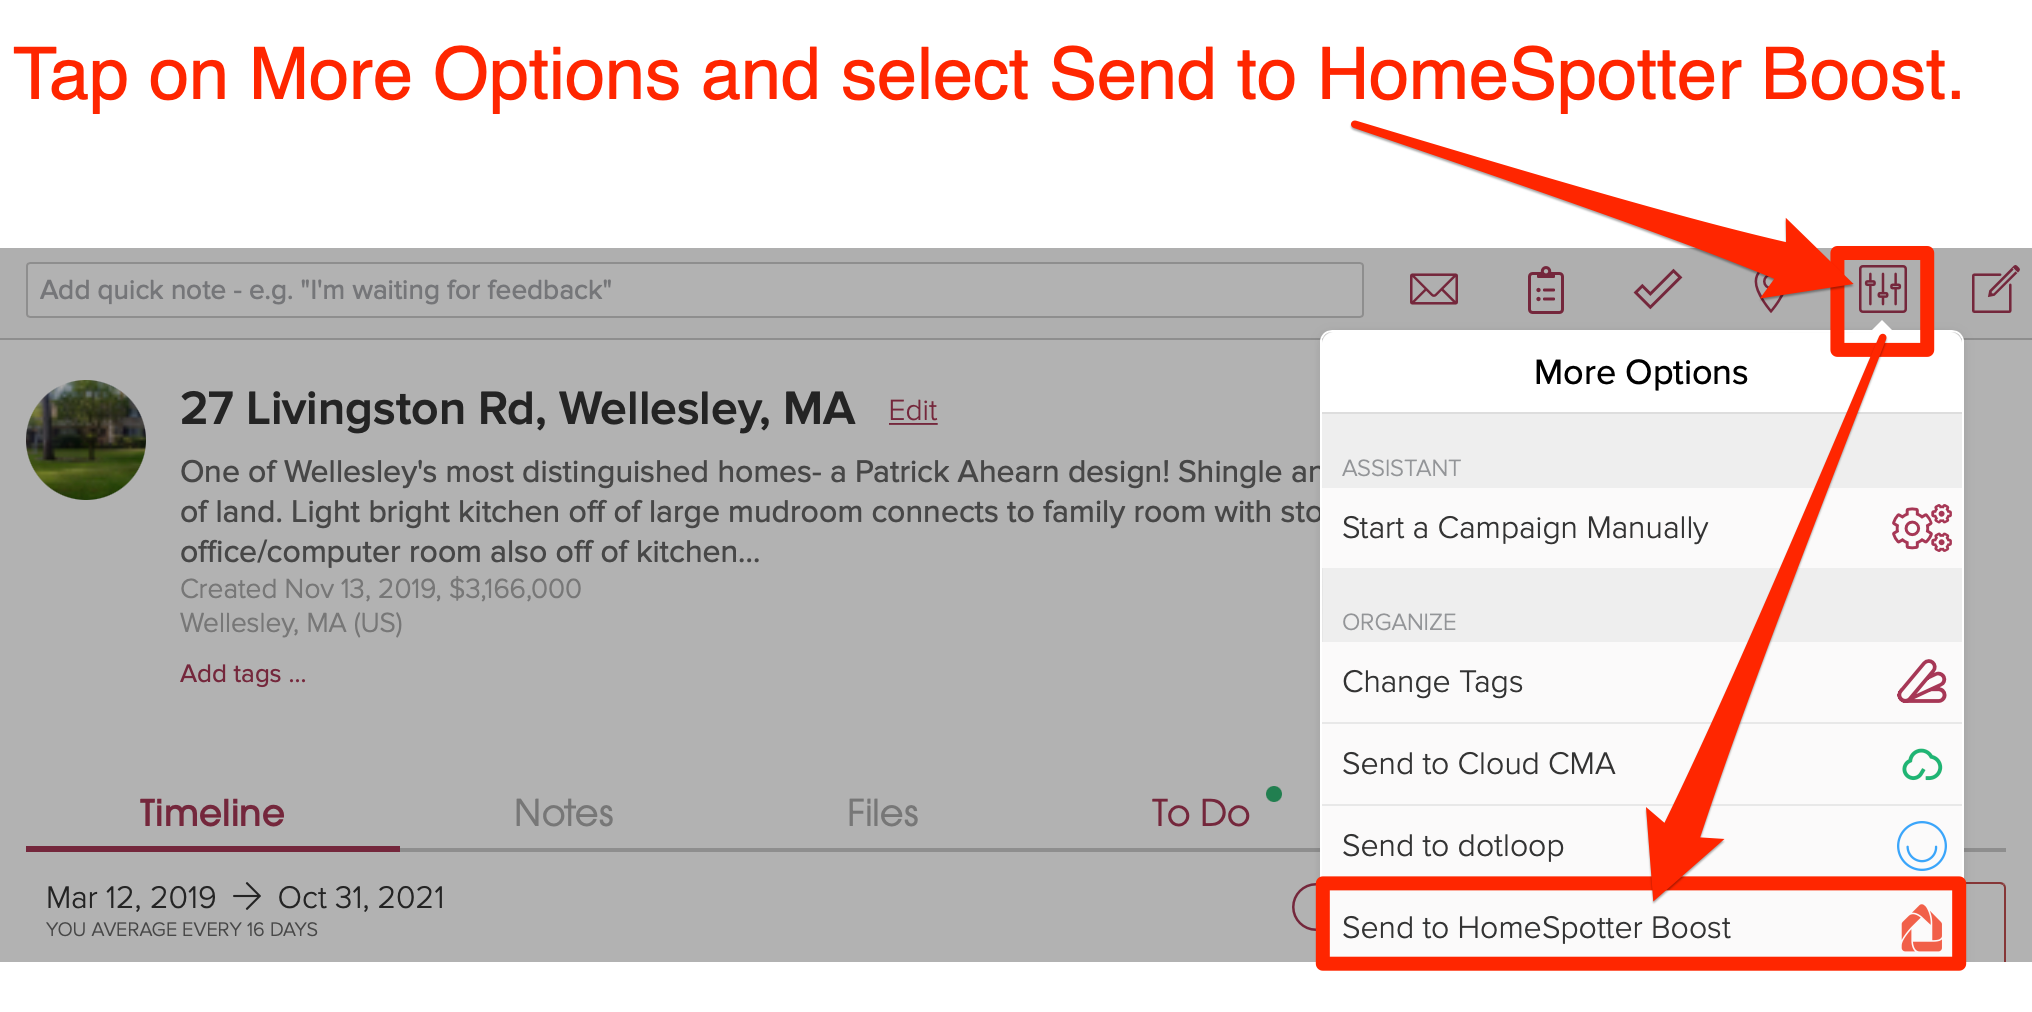 Tap on More Option and select Send to HomeSpotter Boost.